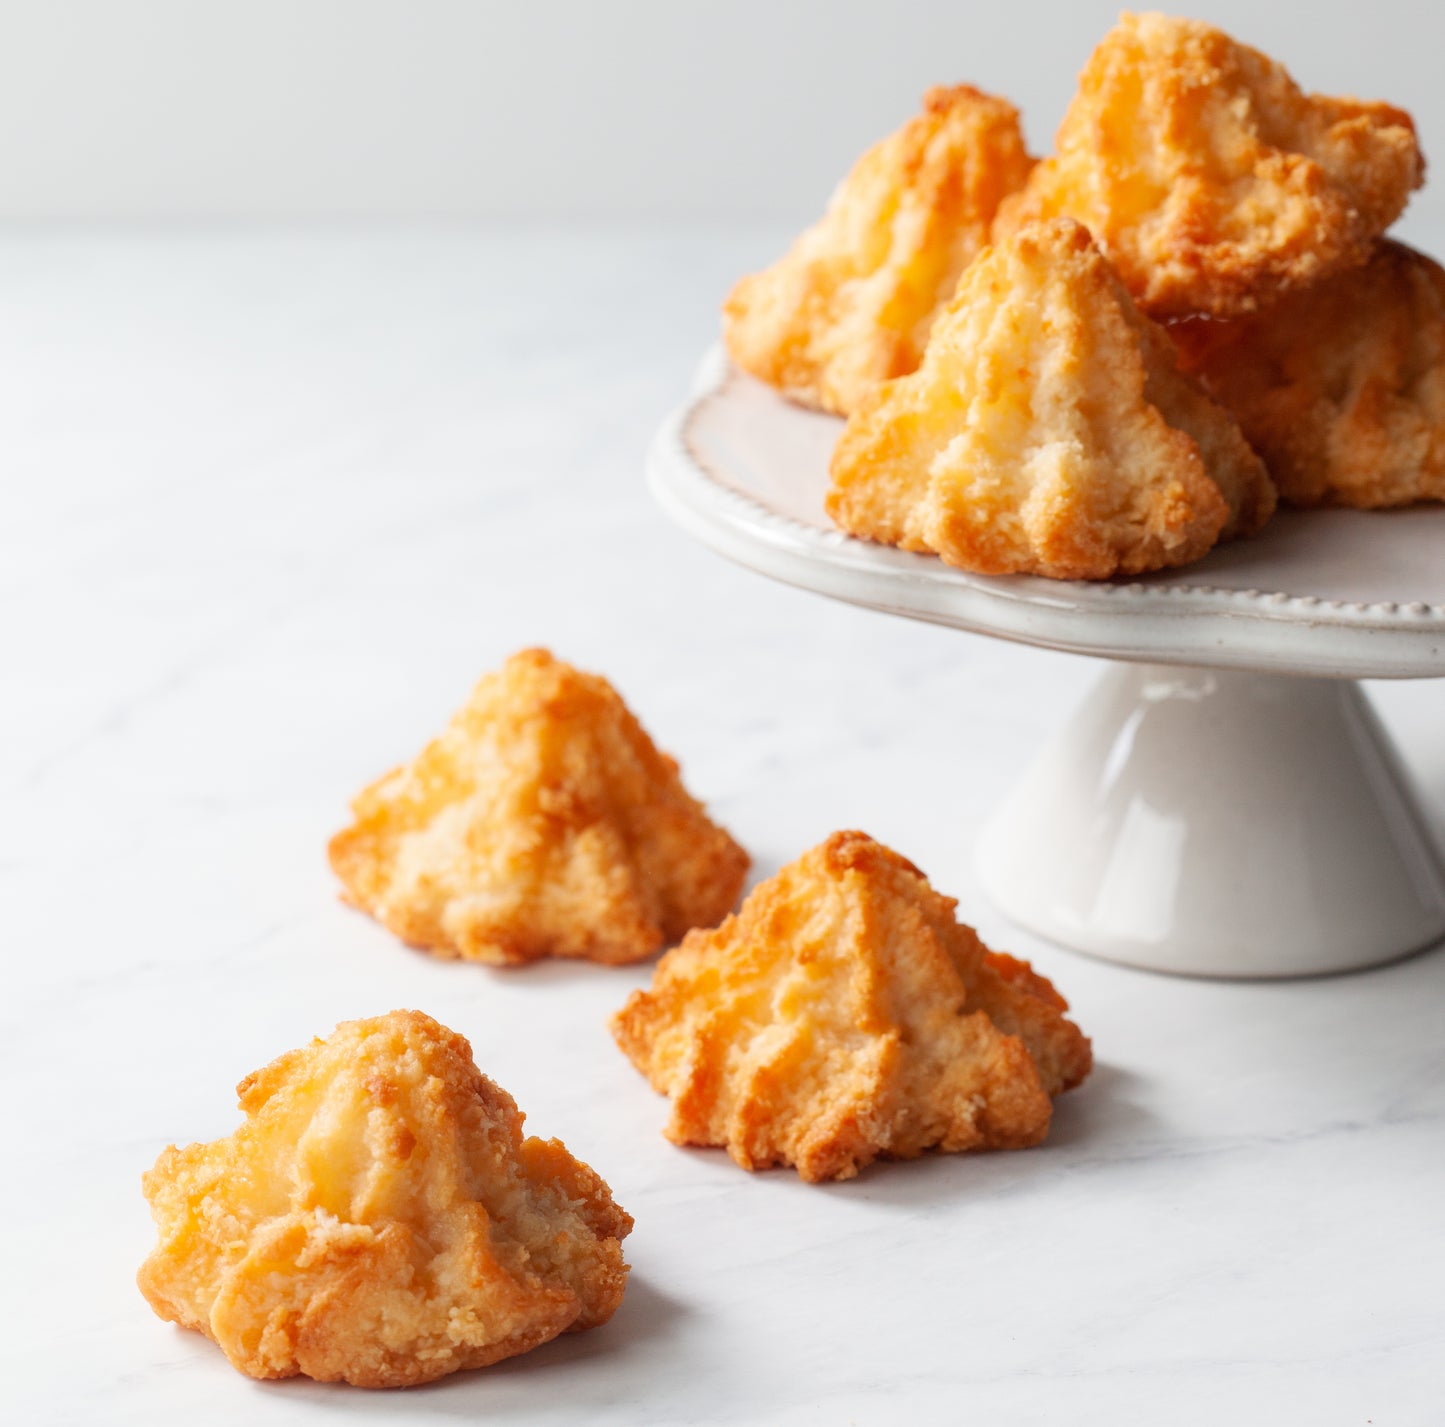 7 Coconut Macaroons from Wlliam Greenberg Dessers